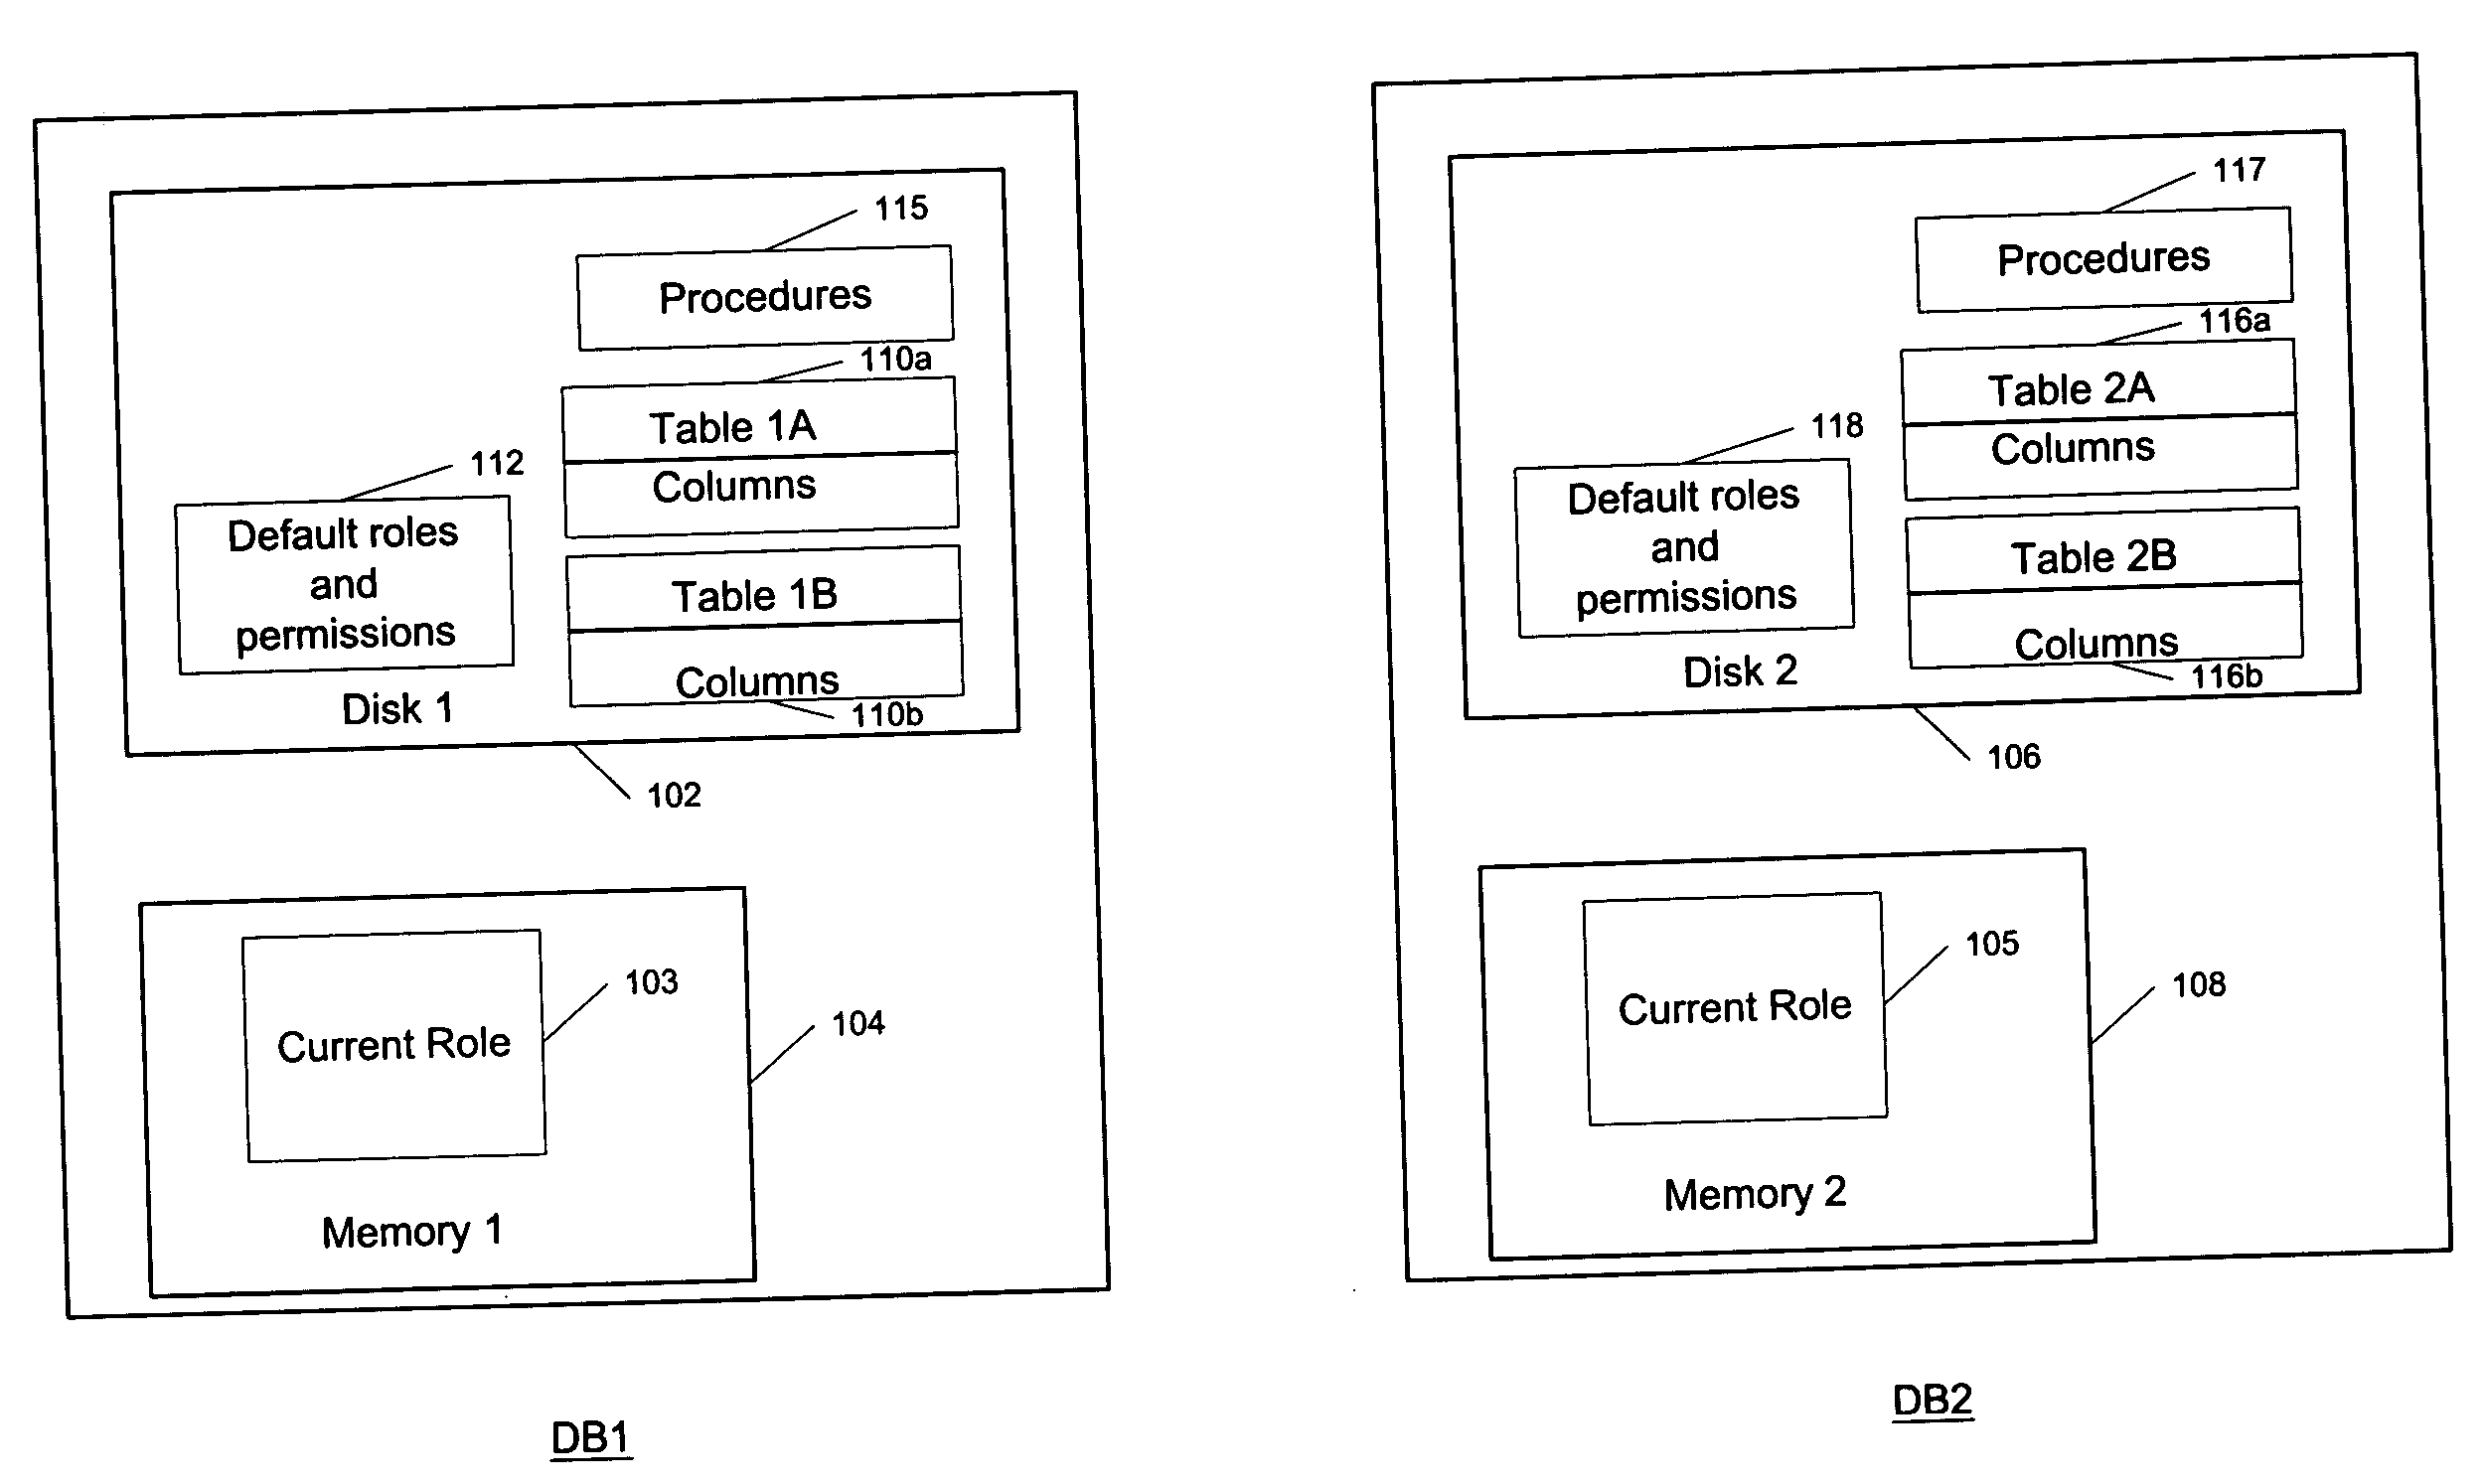 Method and system for providing a default role for a user in a remote database